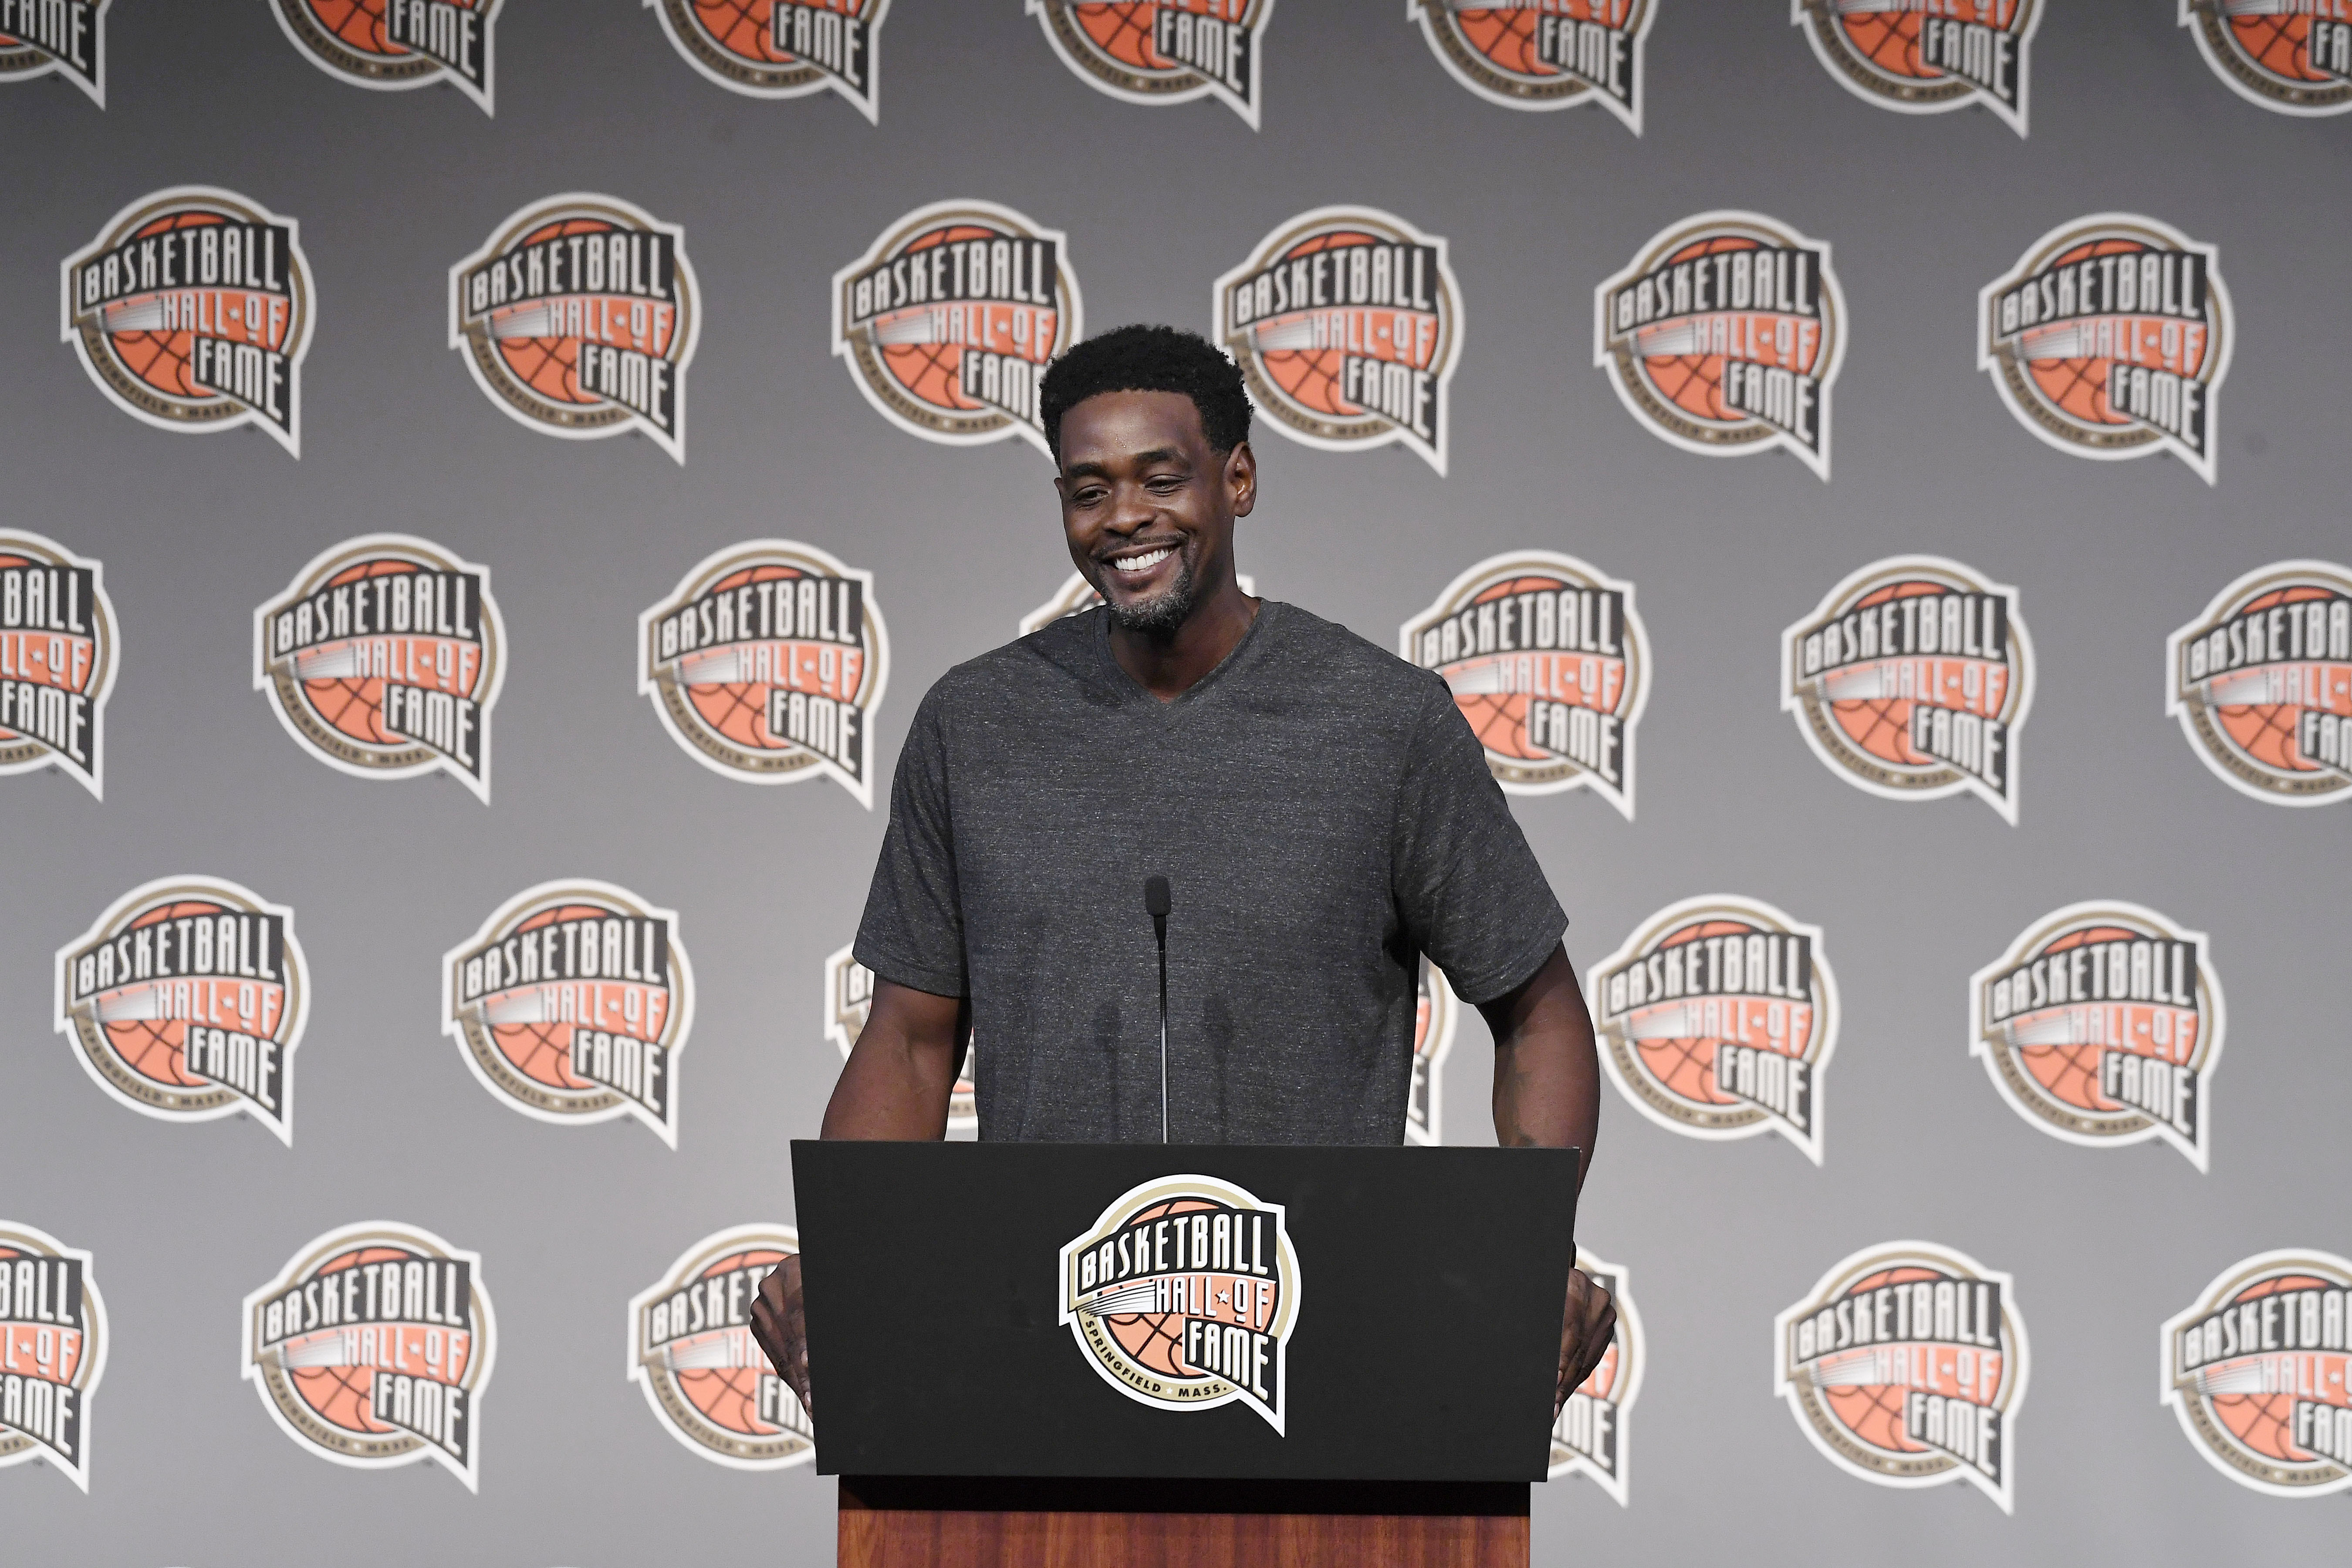 Influential Chris Webber elected to Basketball Hall of Fame